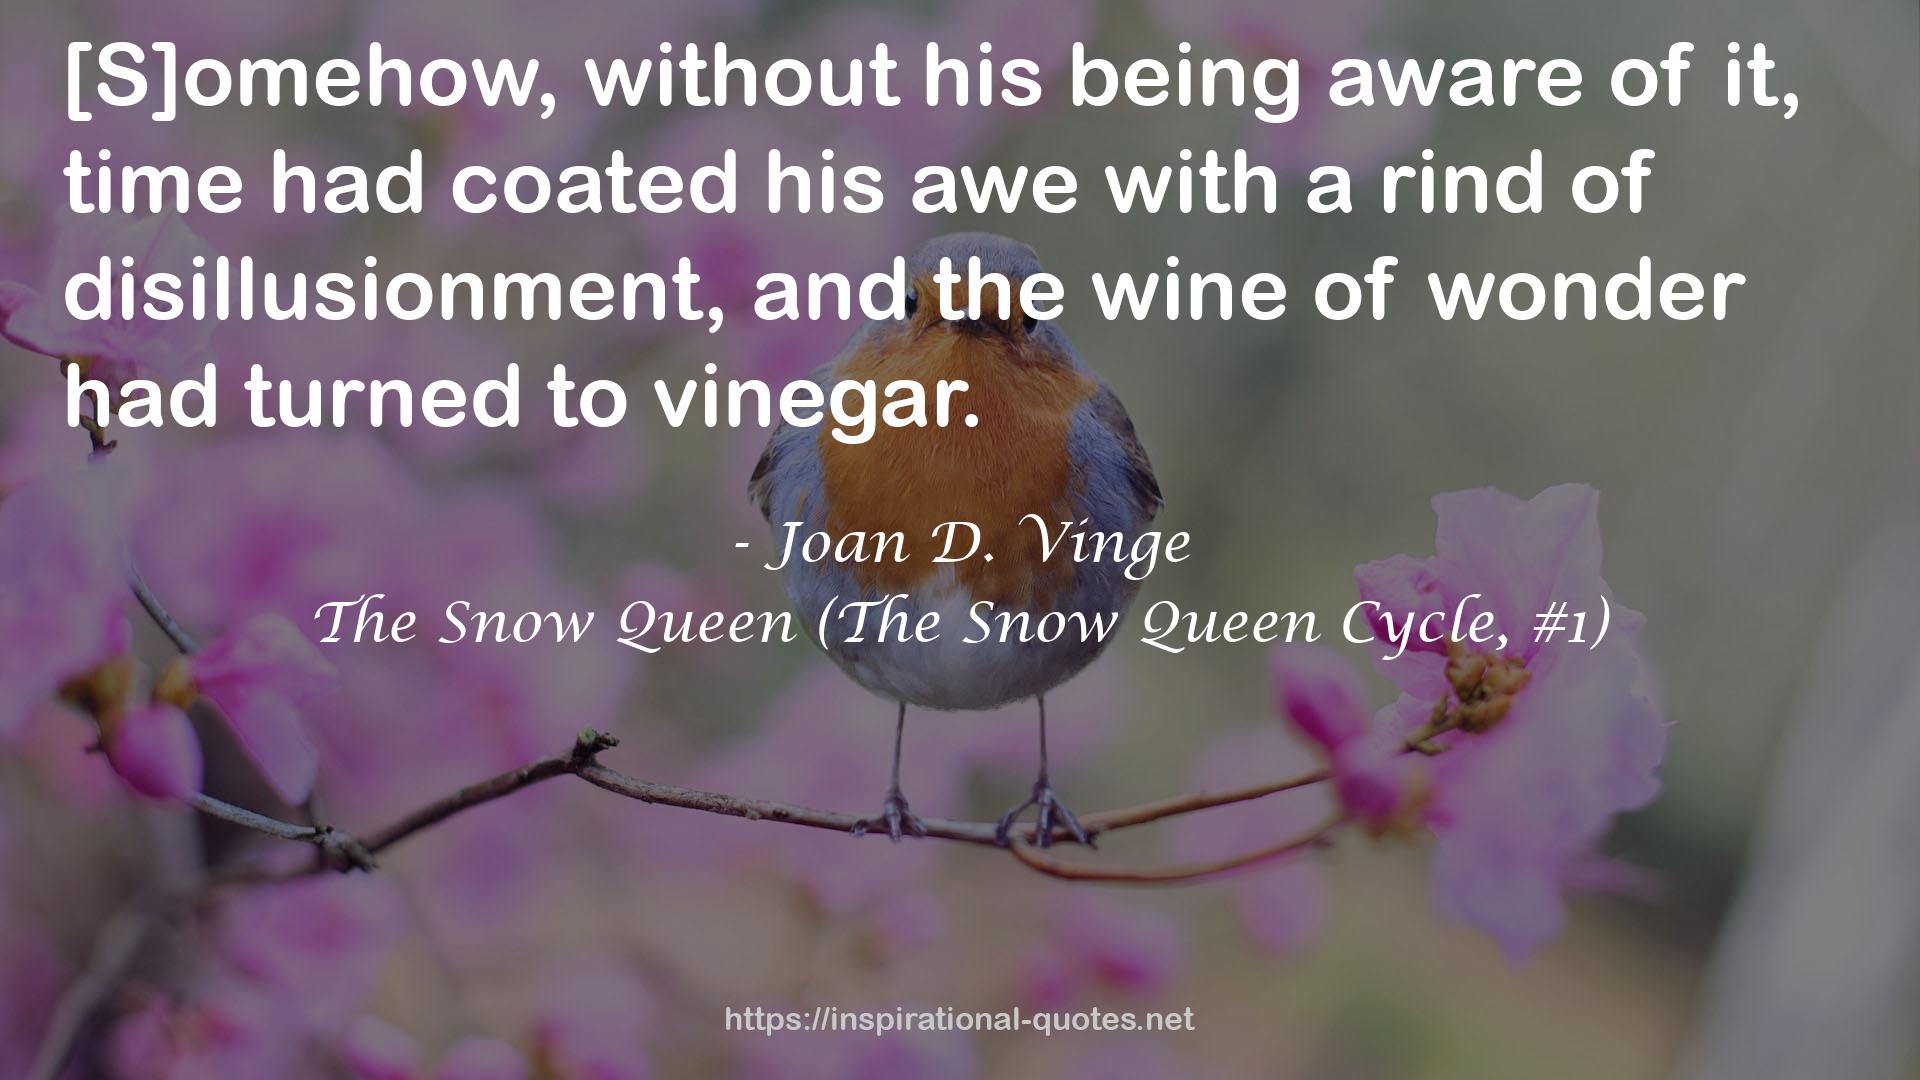 The Snow Queen (The Snow Queen Cycle, #1) QUOTES